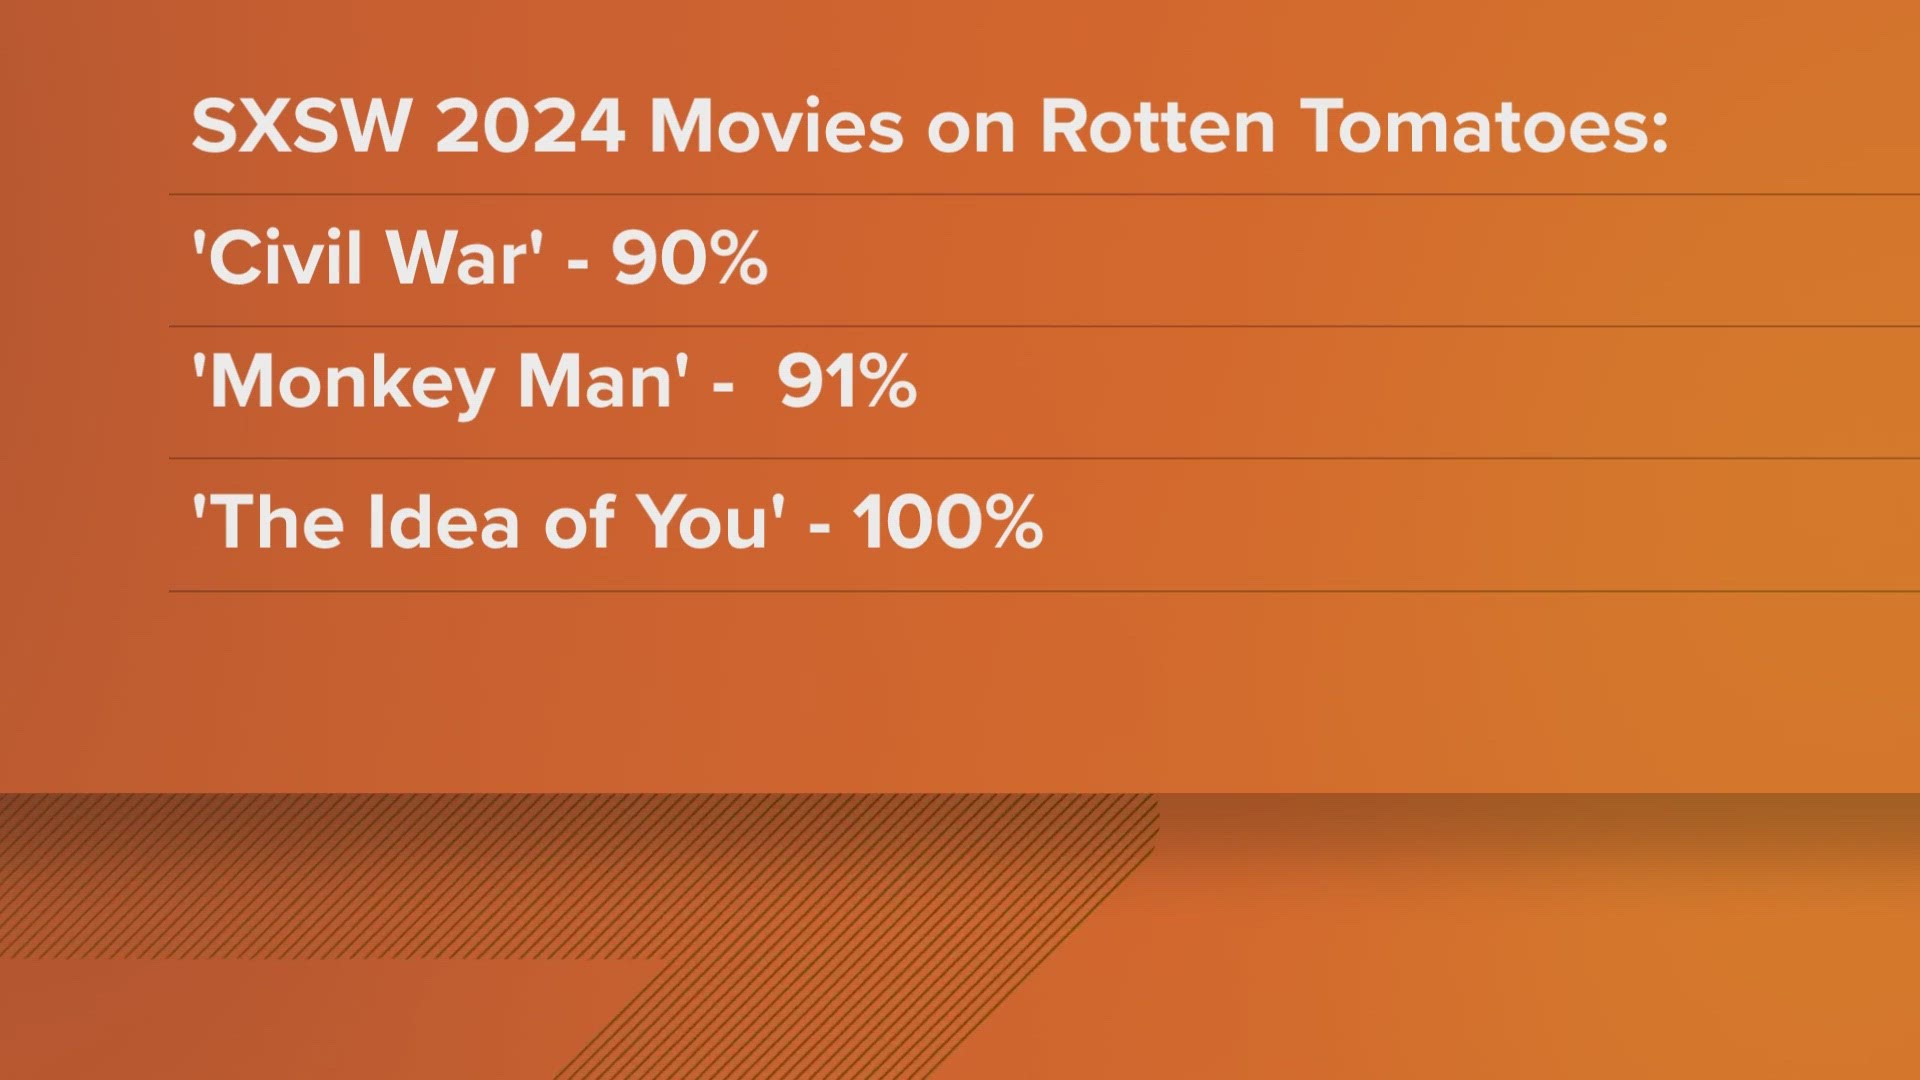 One film, "The Idea of You," currently has a rating of 100% on the review website Rotten Tomatoes.